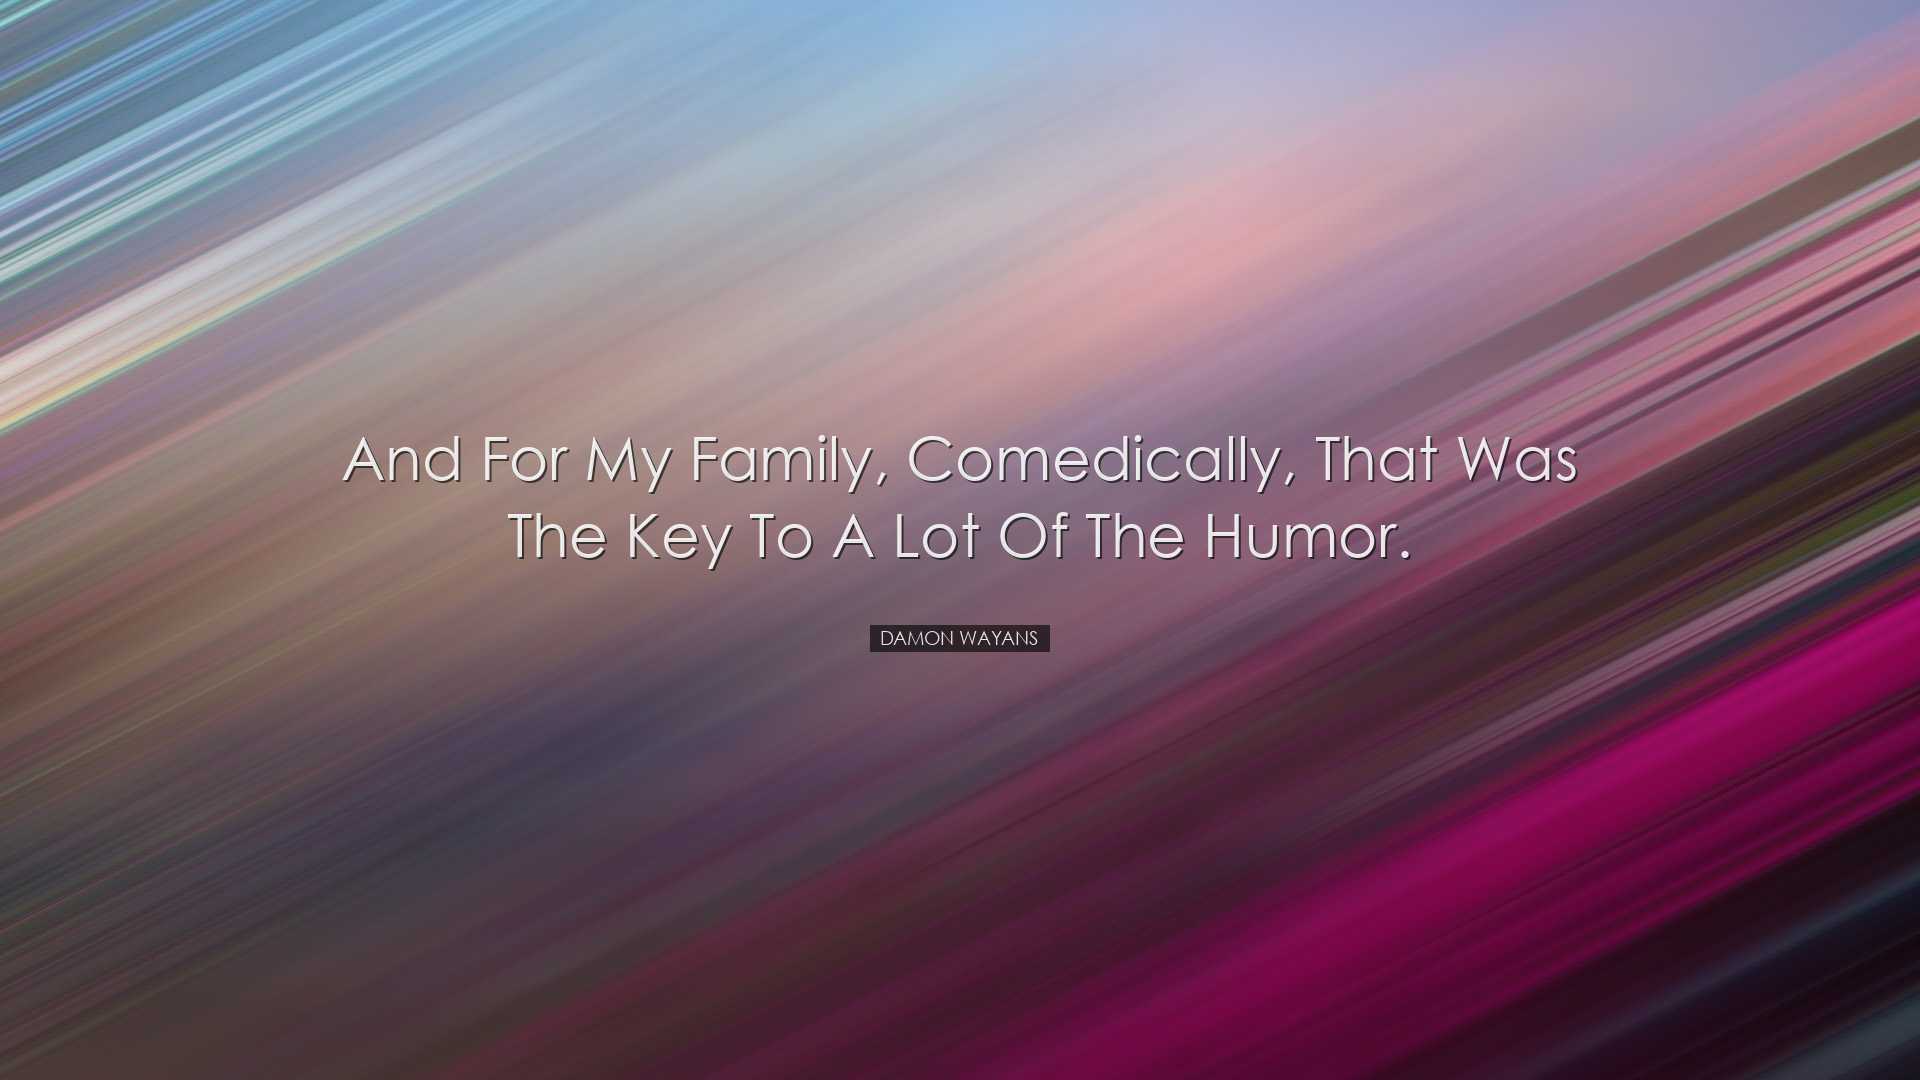 And for my family, comedically, that was the key to a lot of the h